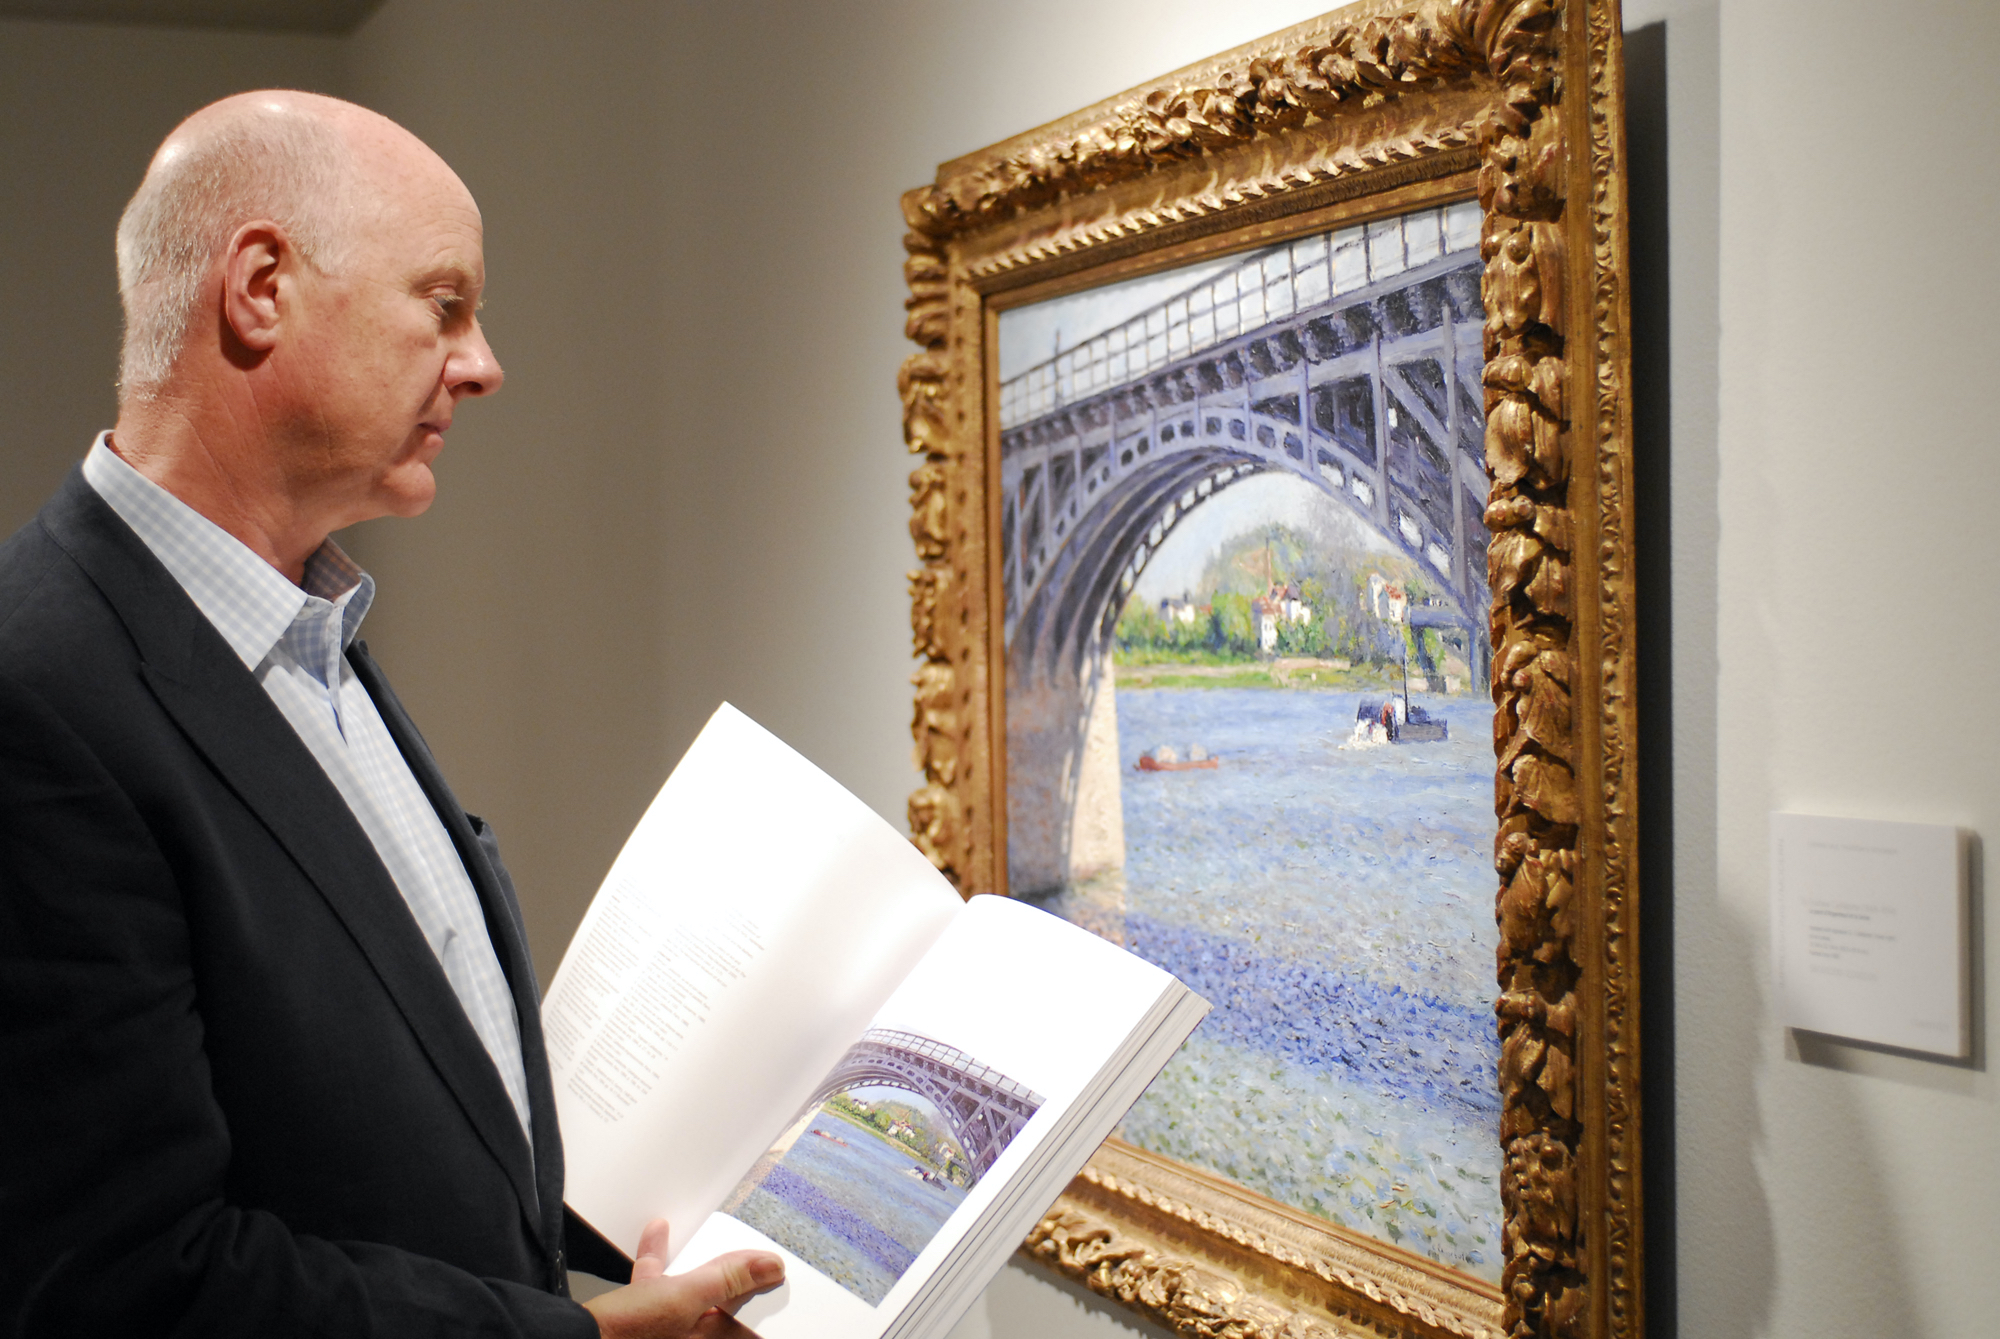 Ray Waterhouse viewing a waterscape painting by Gustave Caillebotte at Christie's auction house while holding an open catalog